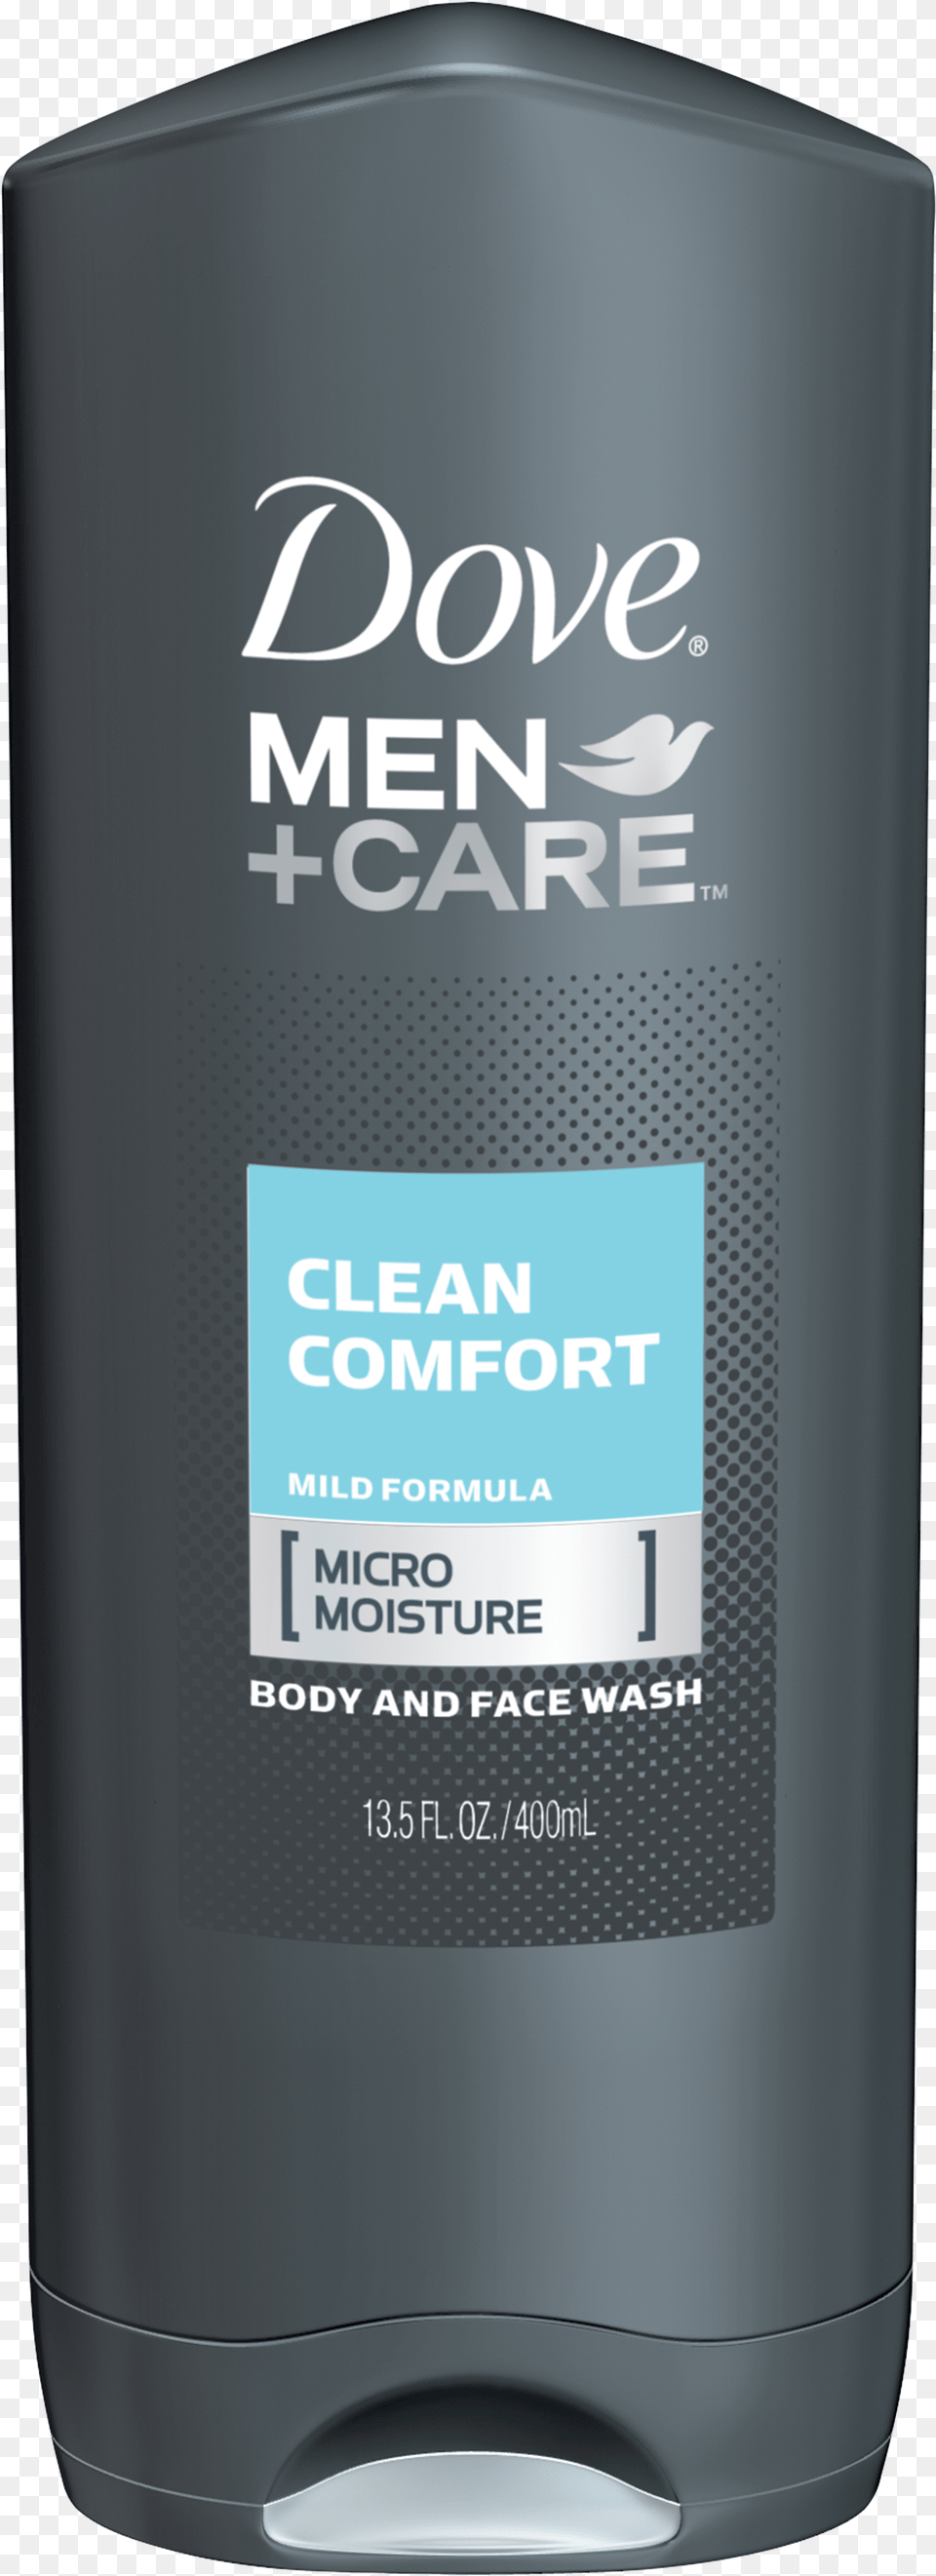 Dove Men Care Clean Comfort Body And Face Wash Dove Men Care Clean Comfort Png Image